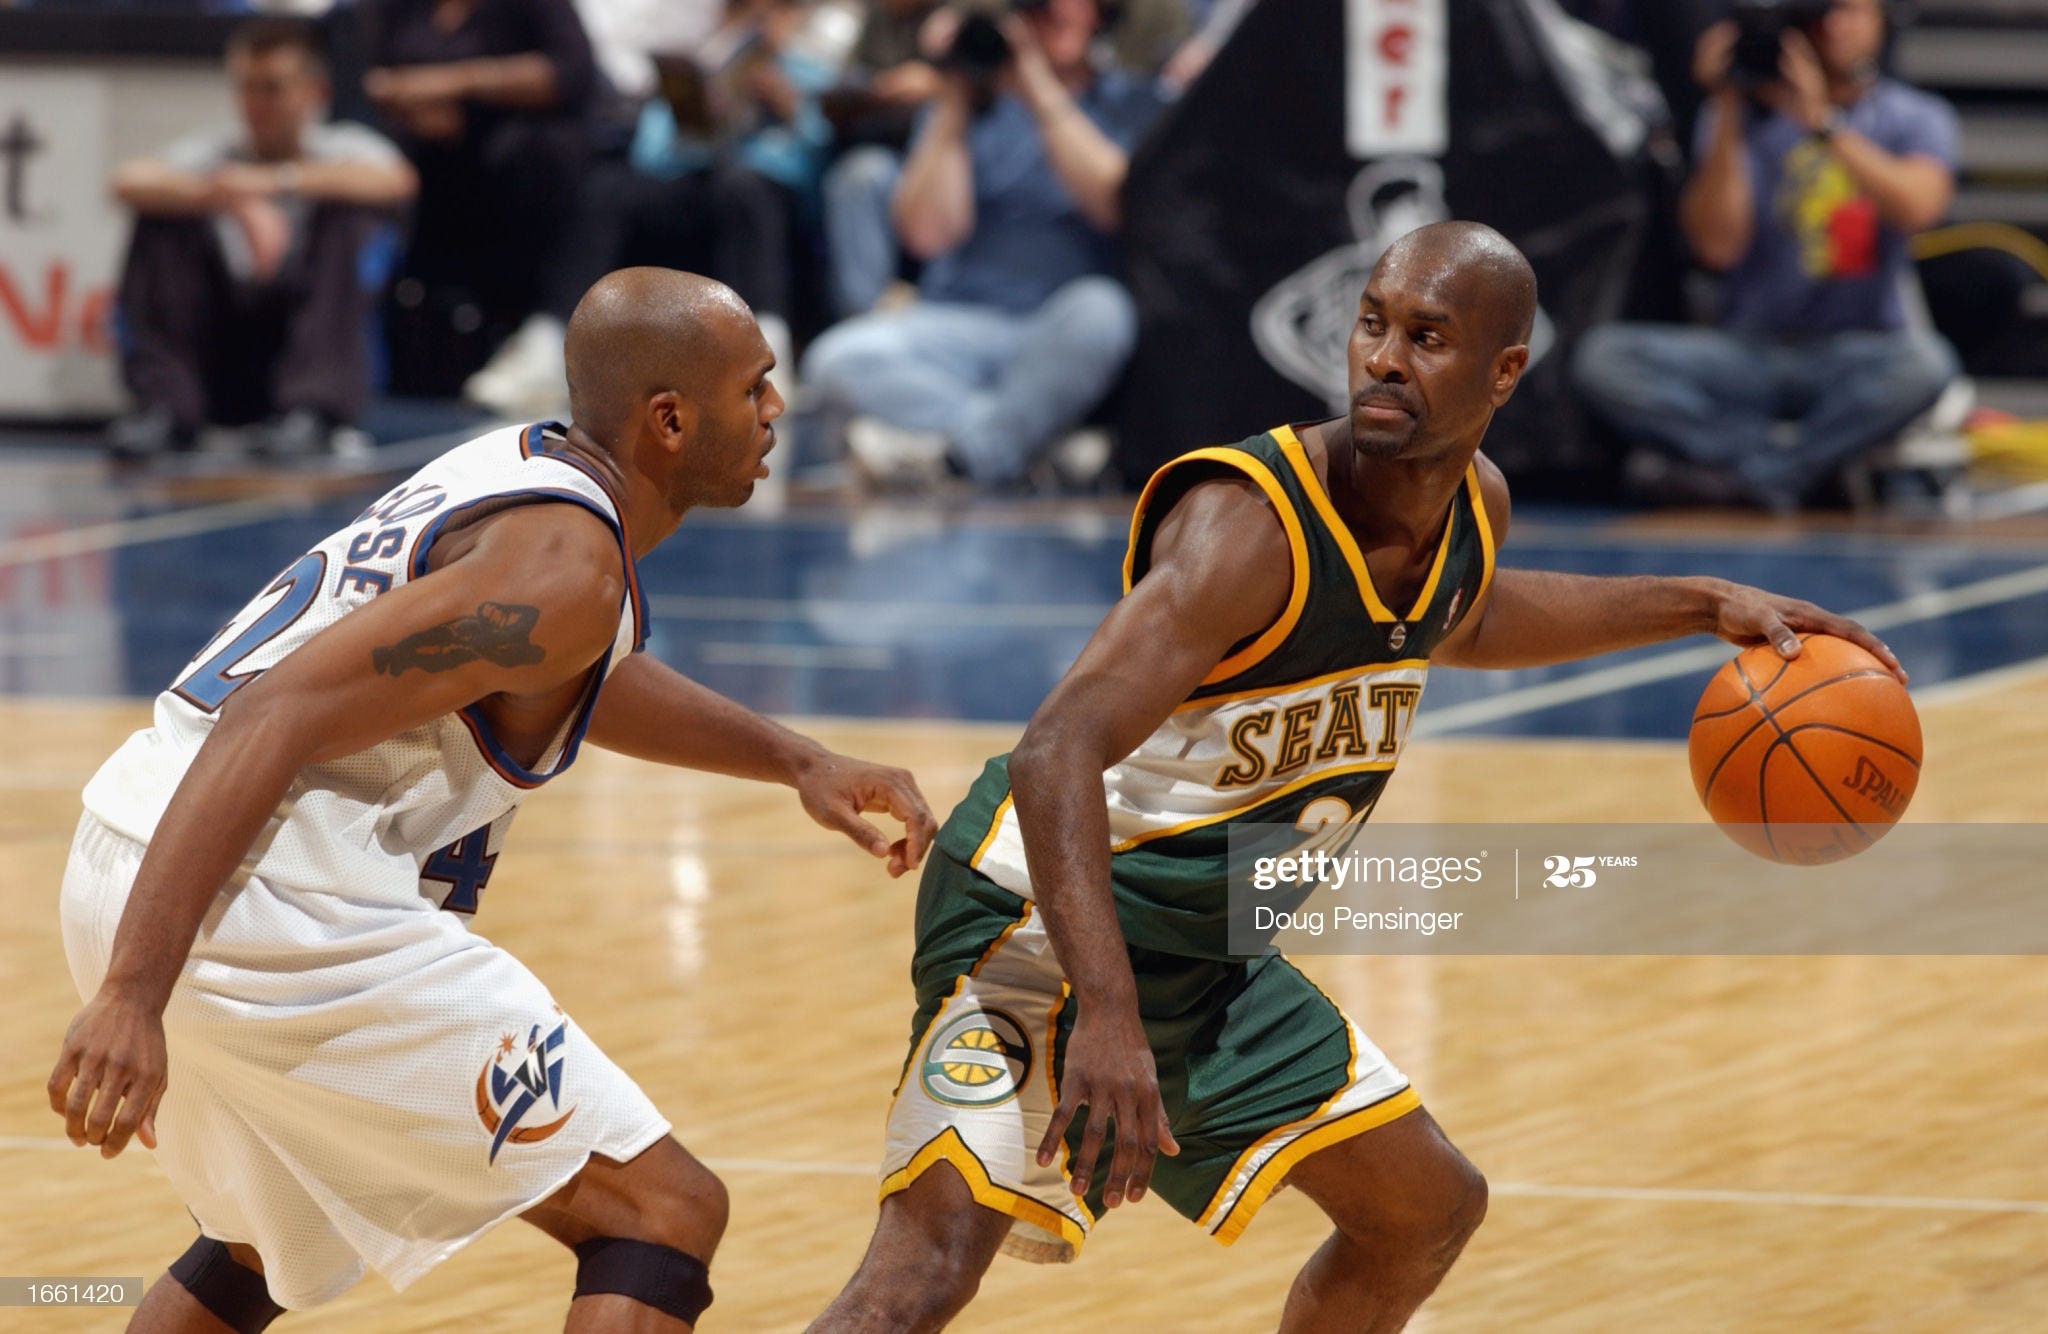 RJP: Seattle SuperSonics - by Curtis M. Harris